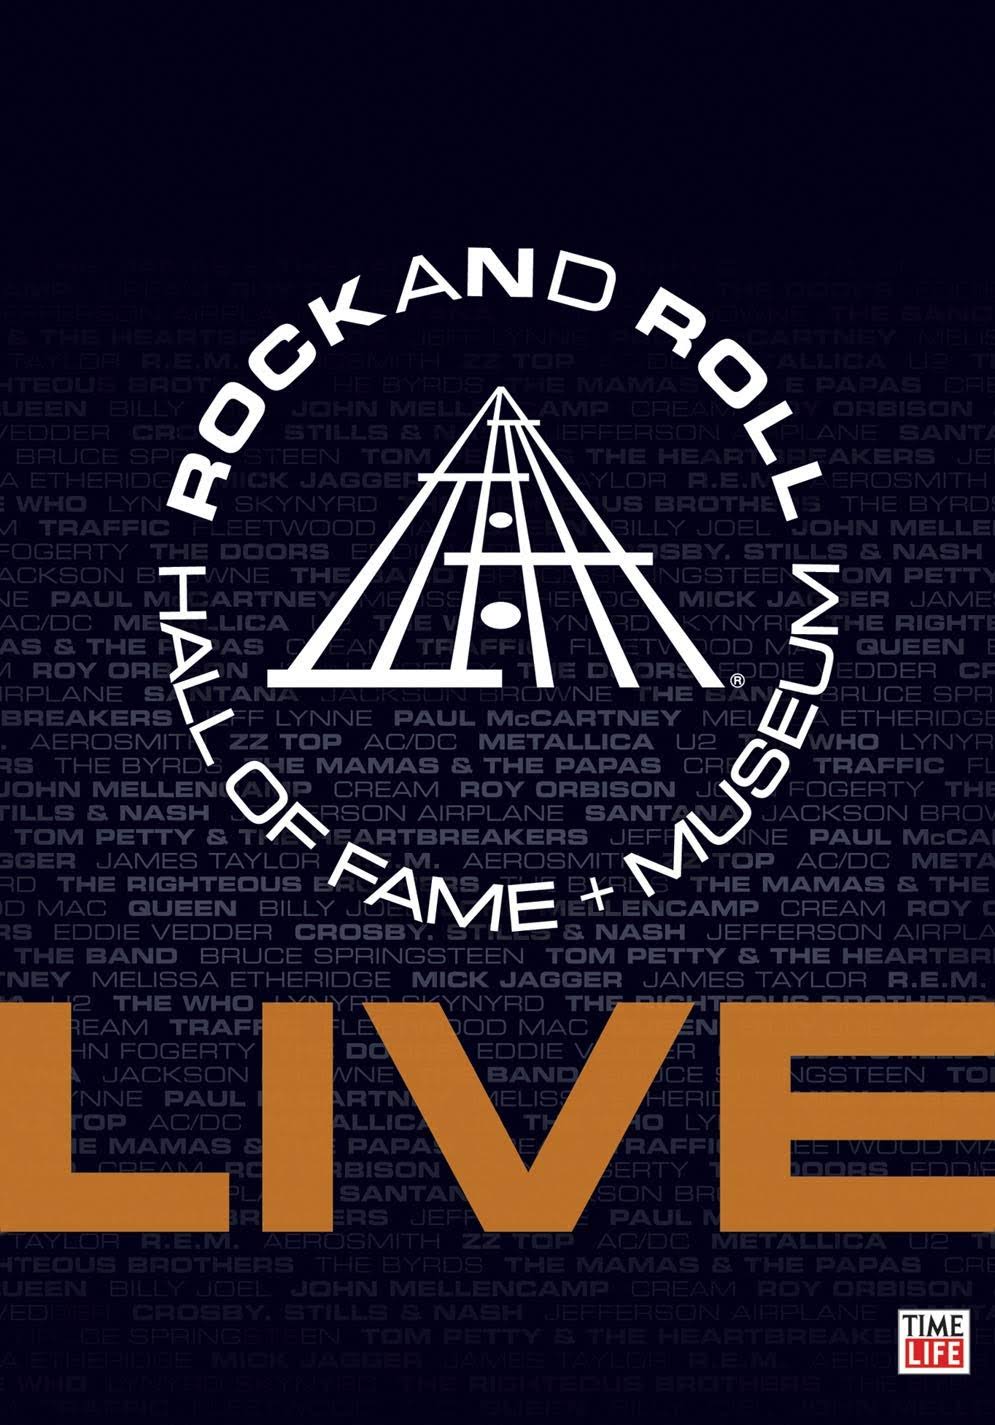 ROCK AND ROLL HALL OF FAME + MUSEUM LIVE - 3 DISC - DVD SET